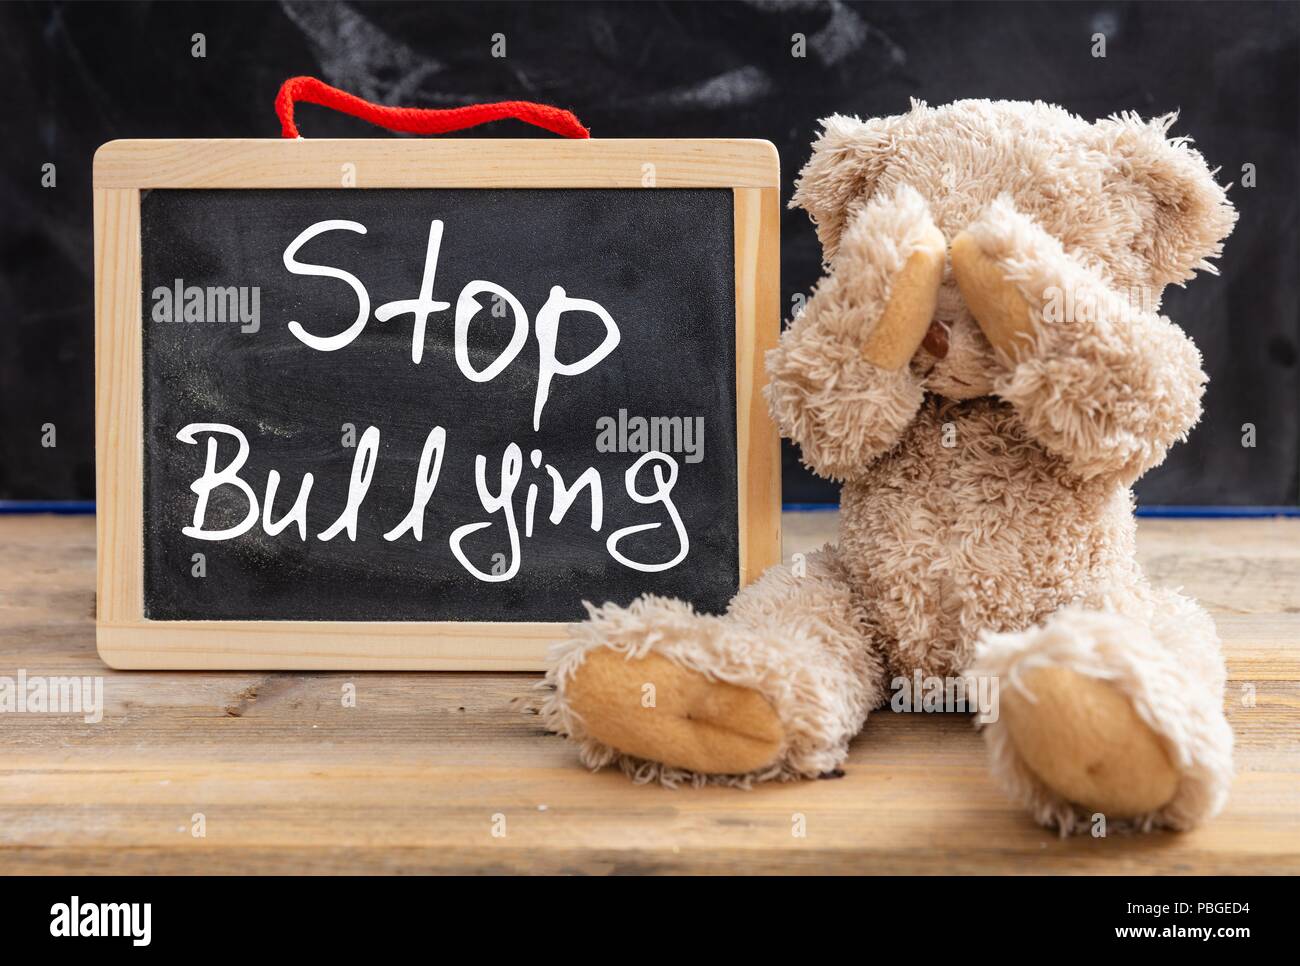 Bullying at school. Teddy bear covering eyes and stop bullying text on a blackboard Stock Photo